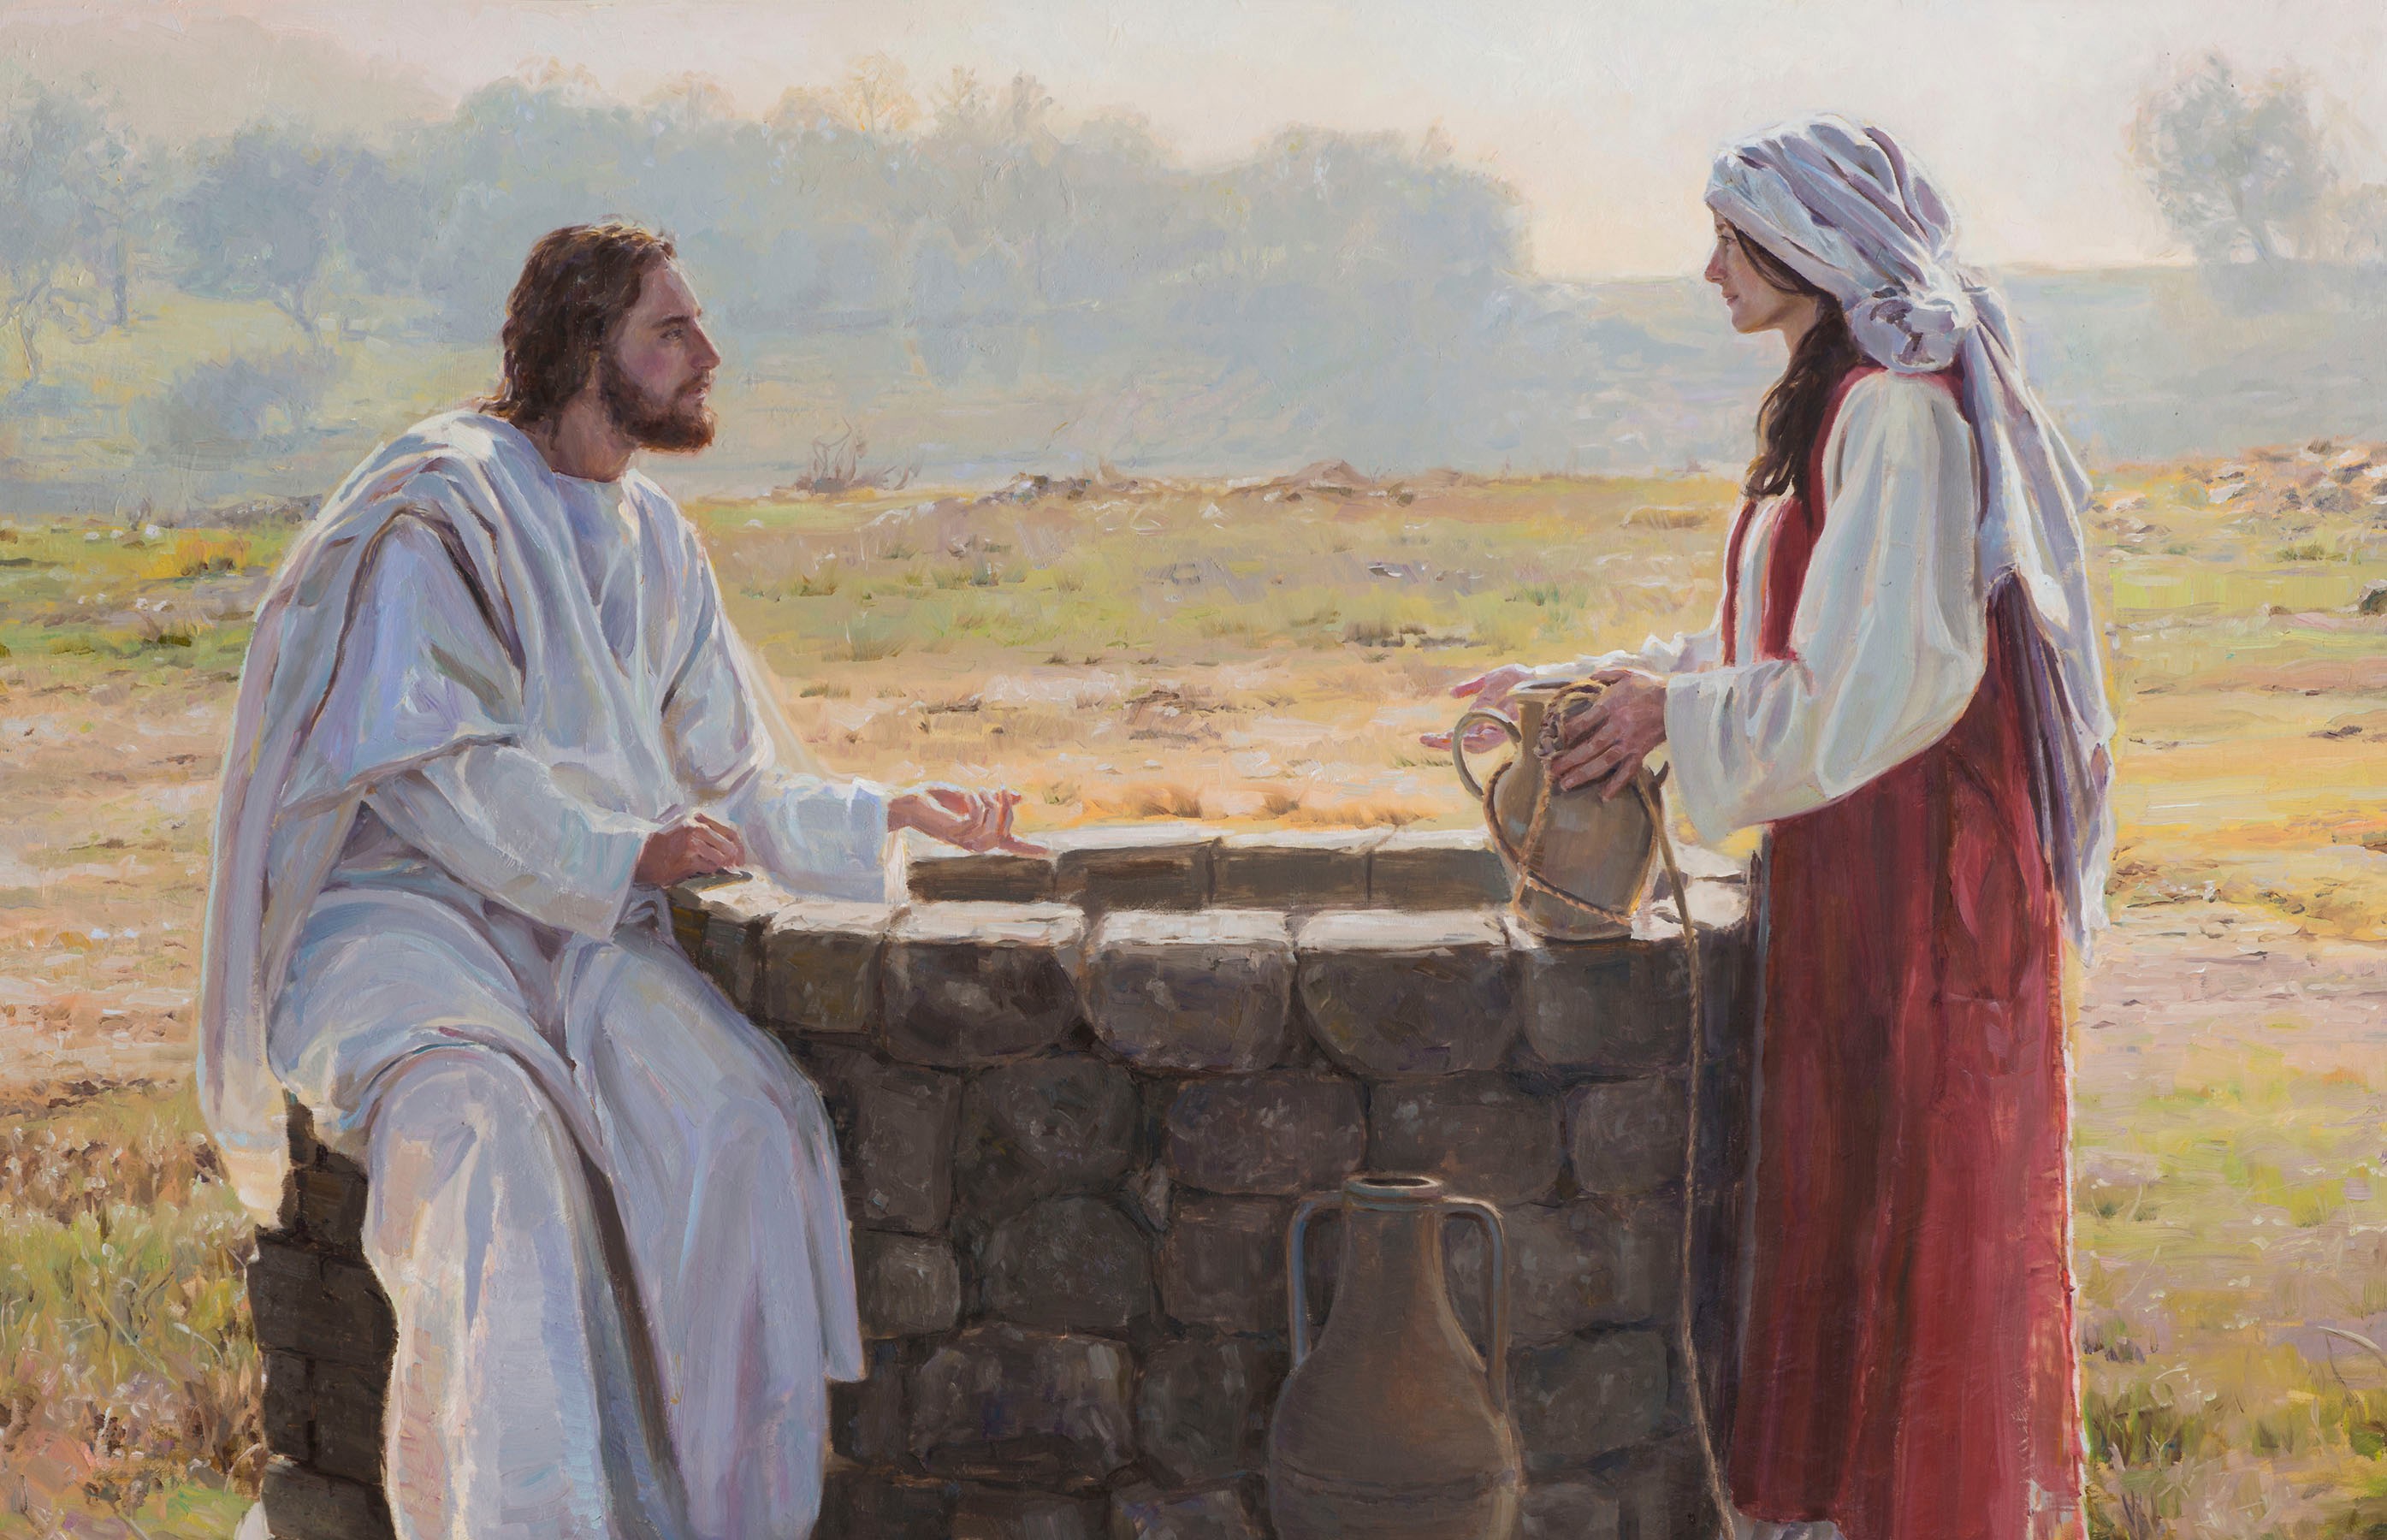 Jesus sitting at the well with a Samaritan woman. John 4:13-14. A wellspring is a continually flowing well. We can only realize it's saving benefits if we come and drink deeply of its waters. The living water that Jesus spoke of is available to all if we will but drink